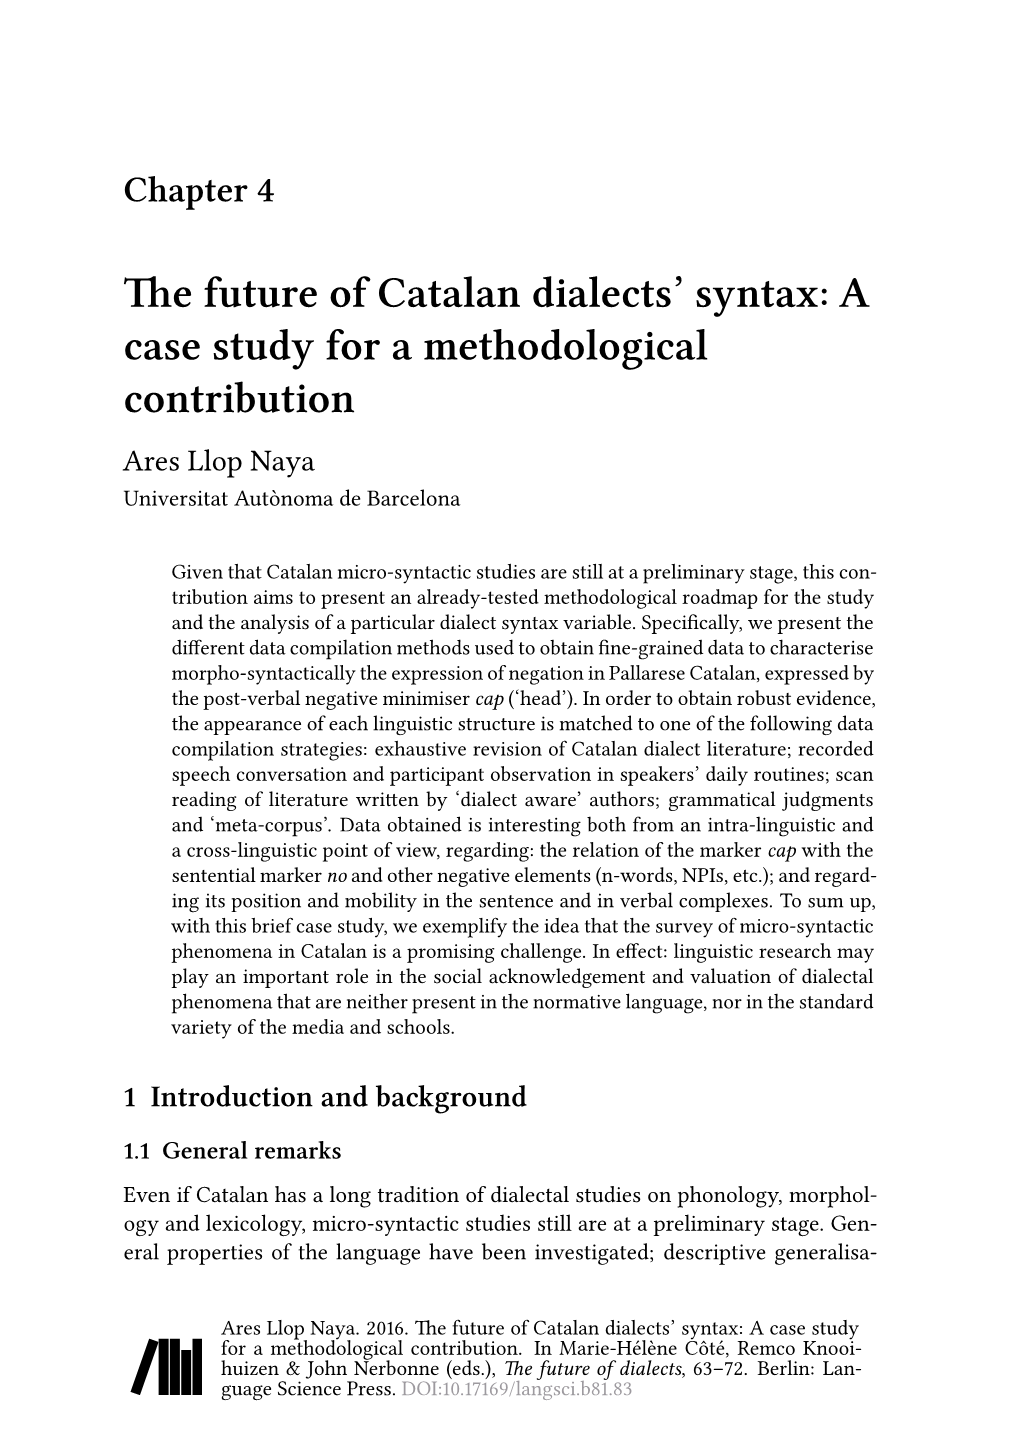 The Future of Catalan Dialects' Syntax